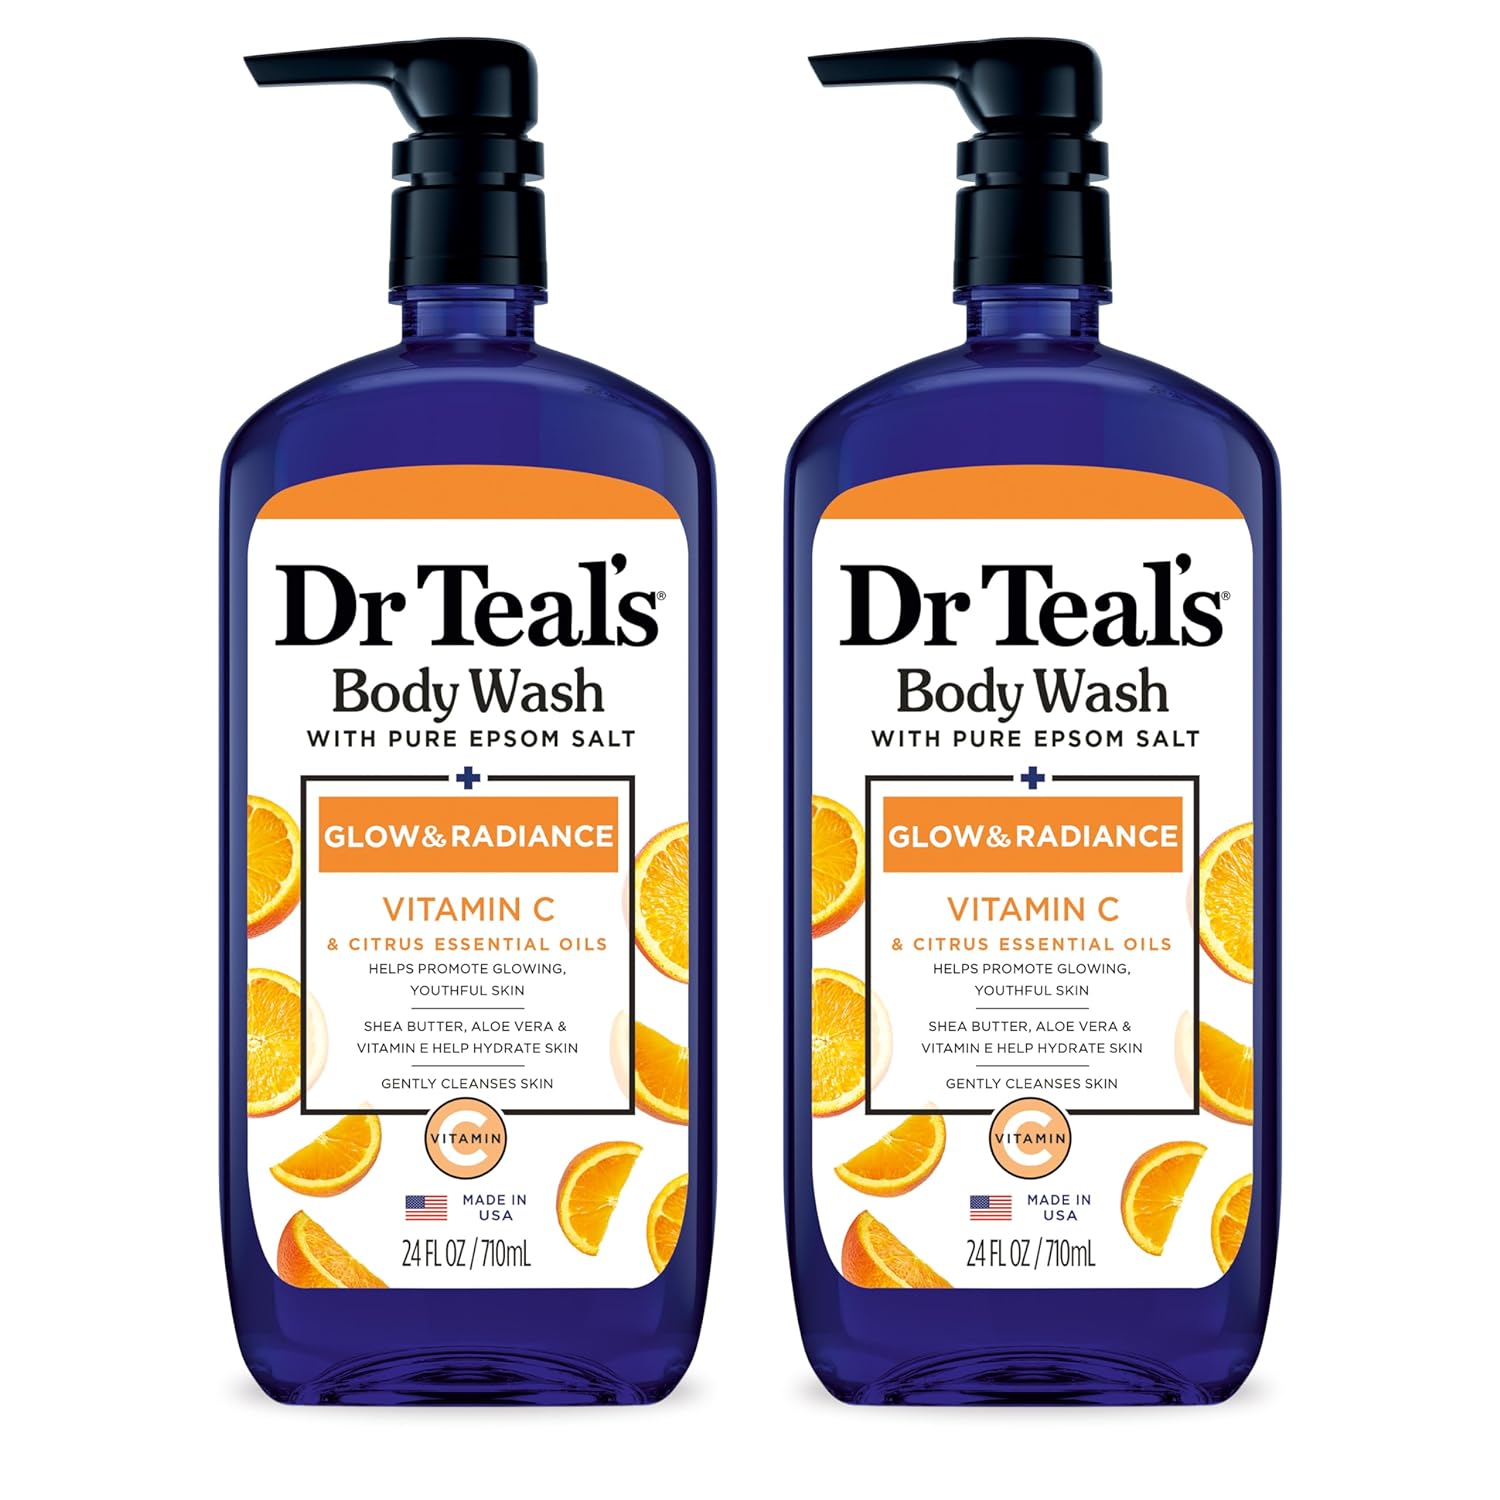 Dr Teal's Body Wash with Pure Epsom Salt, Glow & Radiance with Vitamin C & Citrus Essential Oils, 24oz (Pack of 2) (Packaging May Vary)